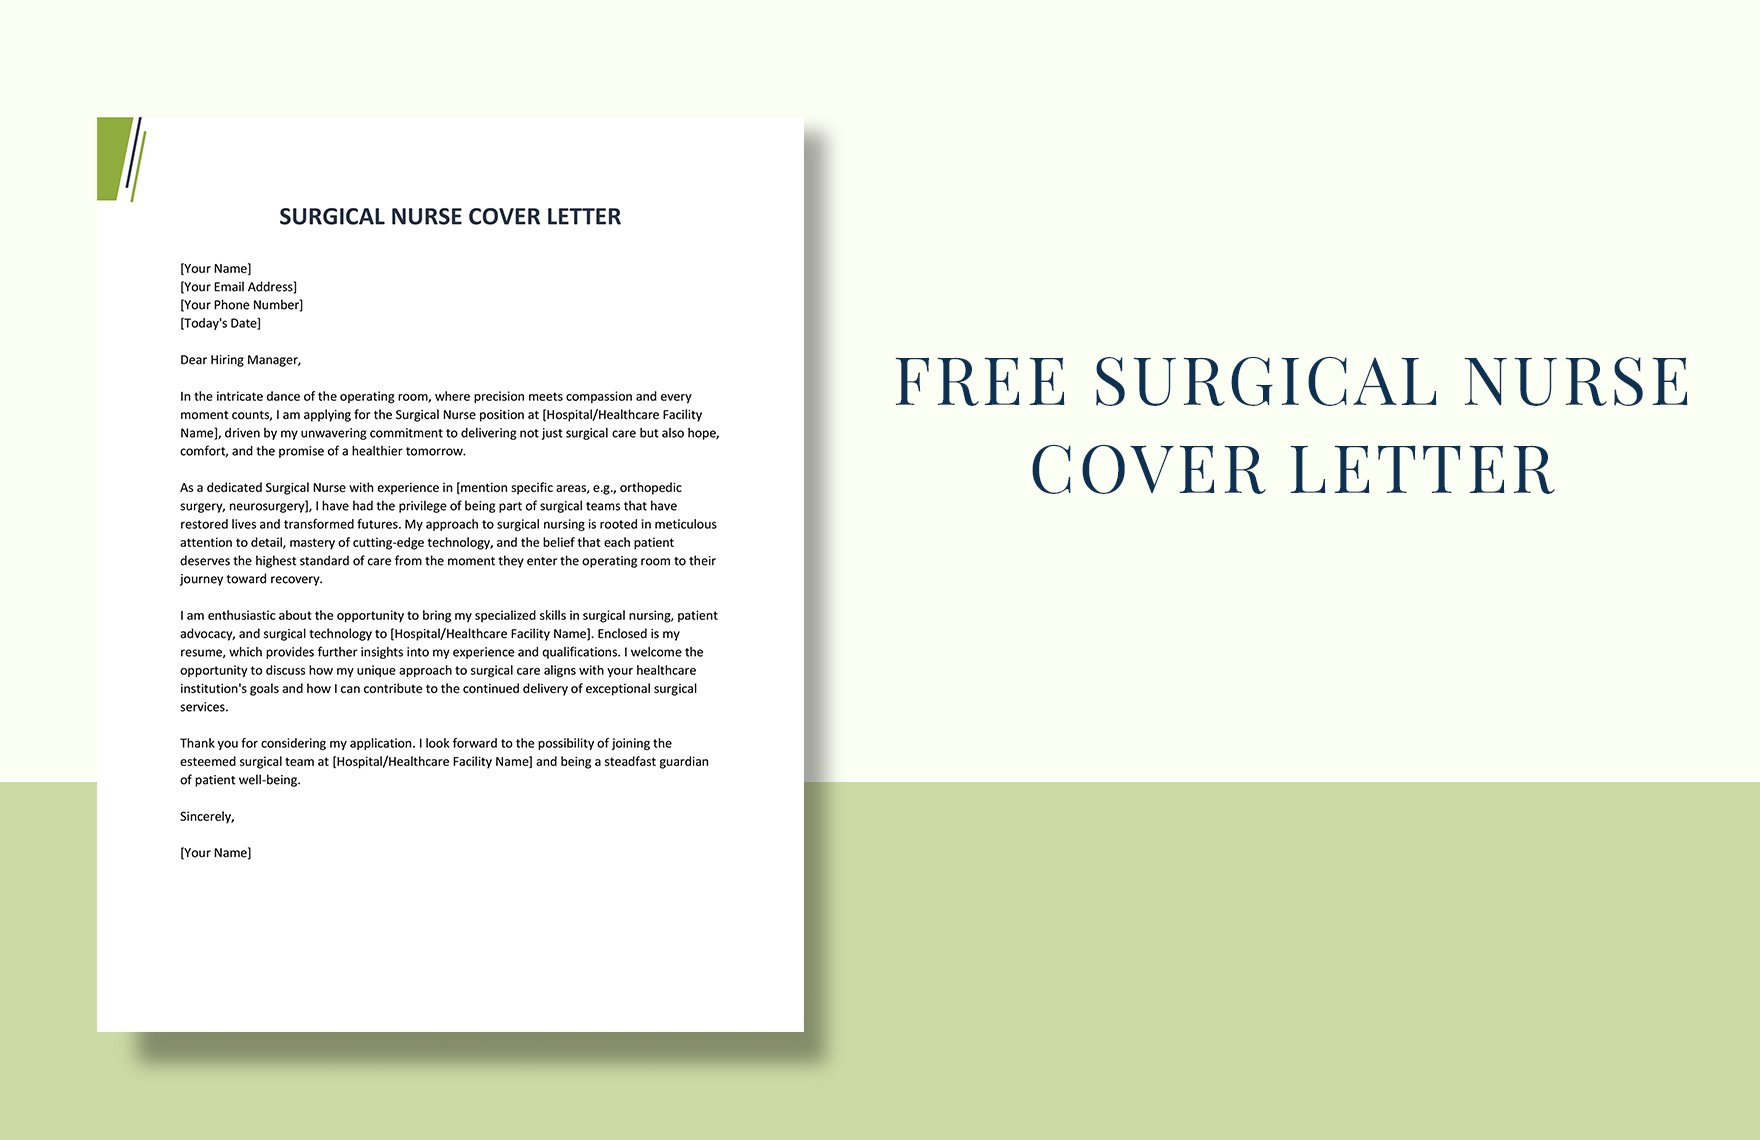 Surgical Nurse Cover Letter in Word, Google Docs